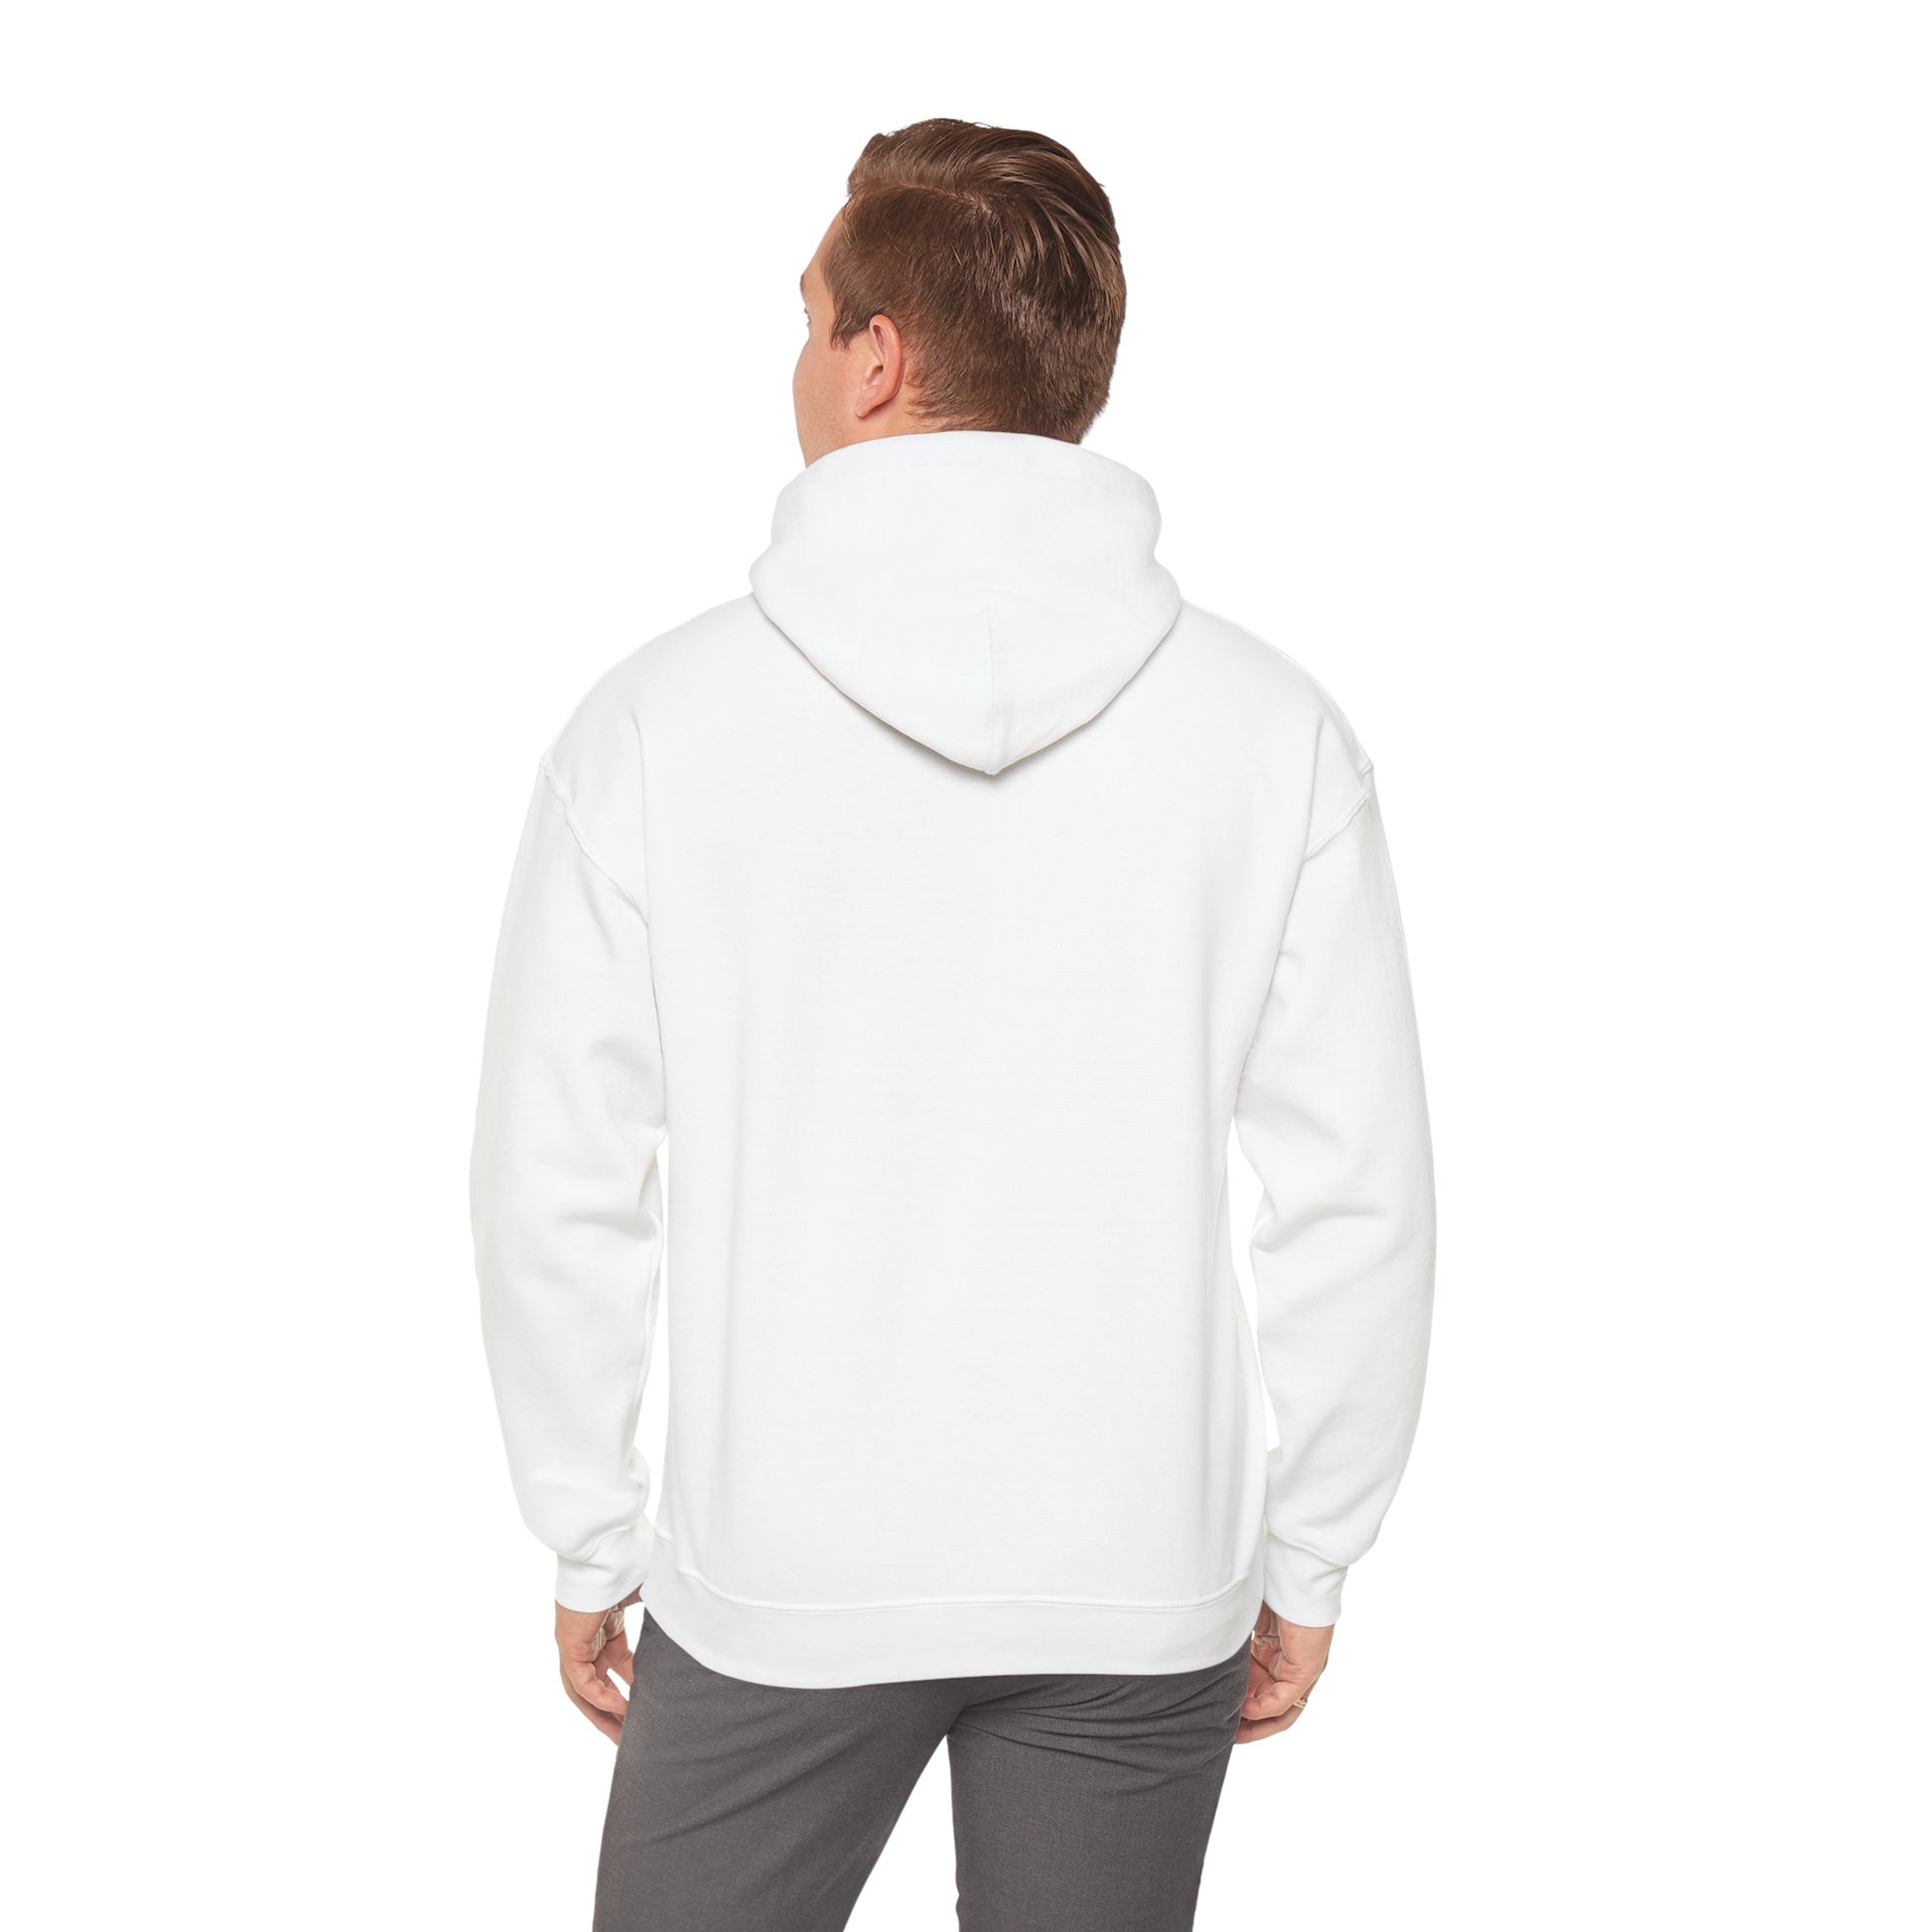 Rear view of a man wearing a Printify Unisex Heavy Blend™ Hooded Sweatshirt in white and grey pants, standing against a white background in Toronto's Cabbagetown. The hoodie's hood is up, partially obscuring his brown hair.